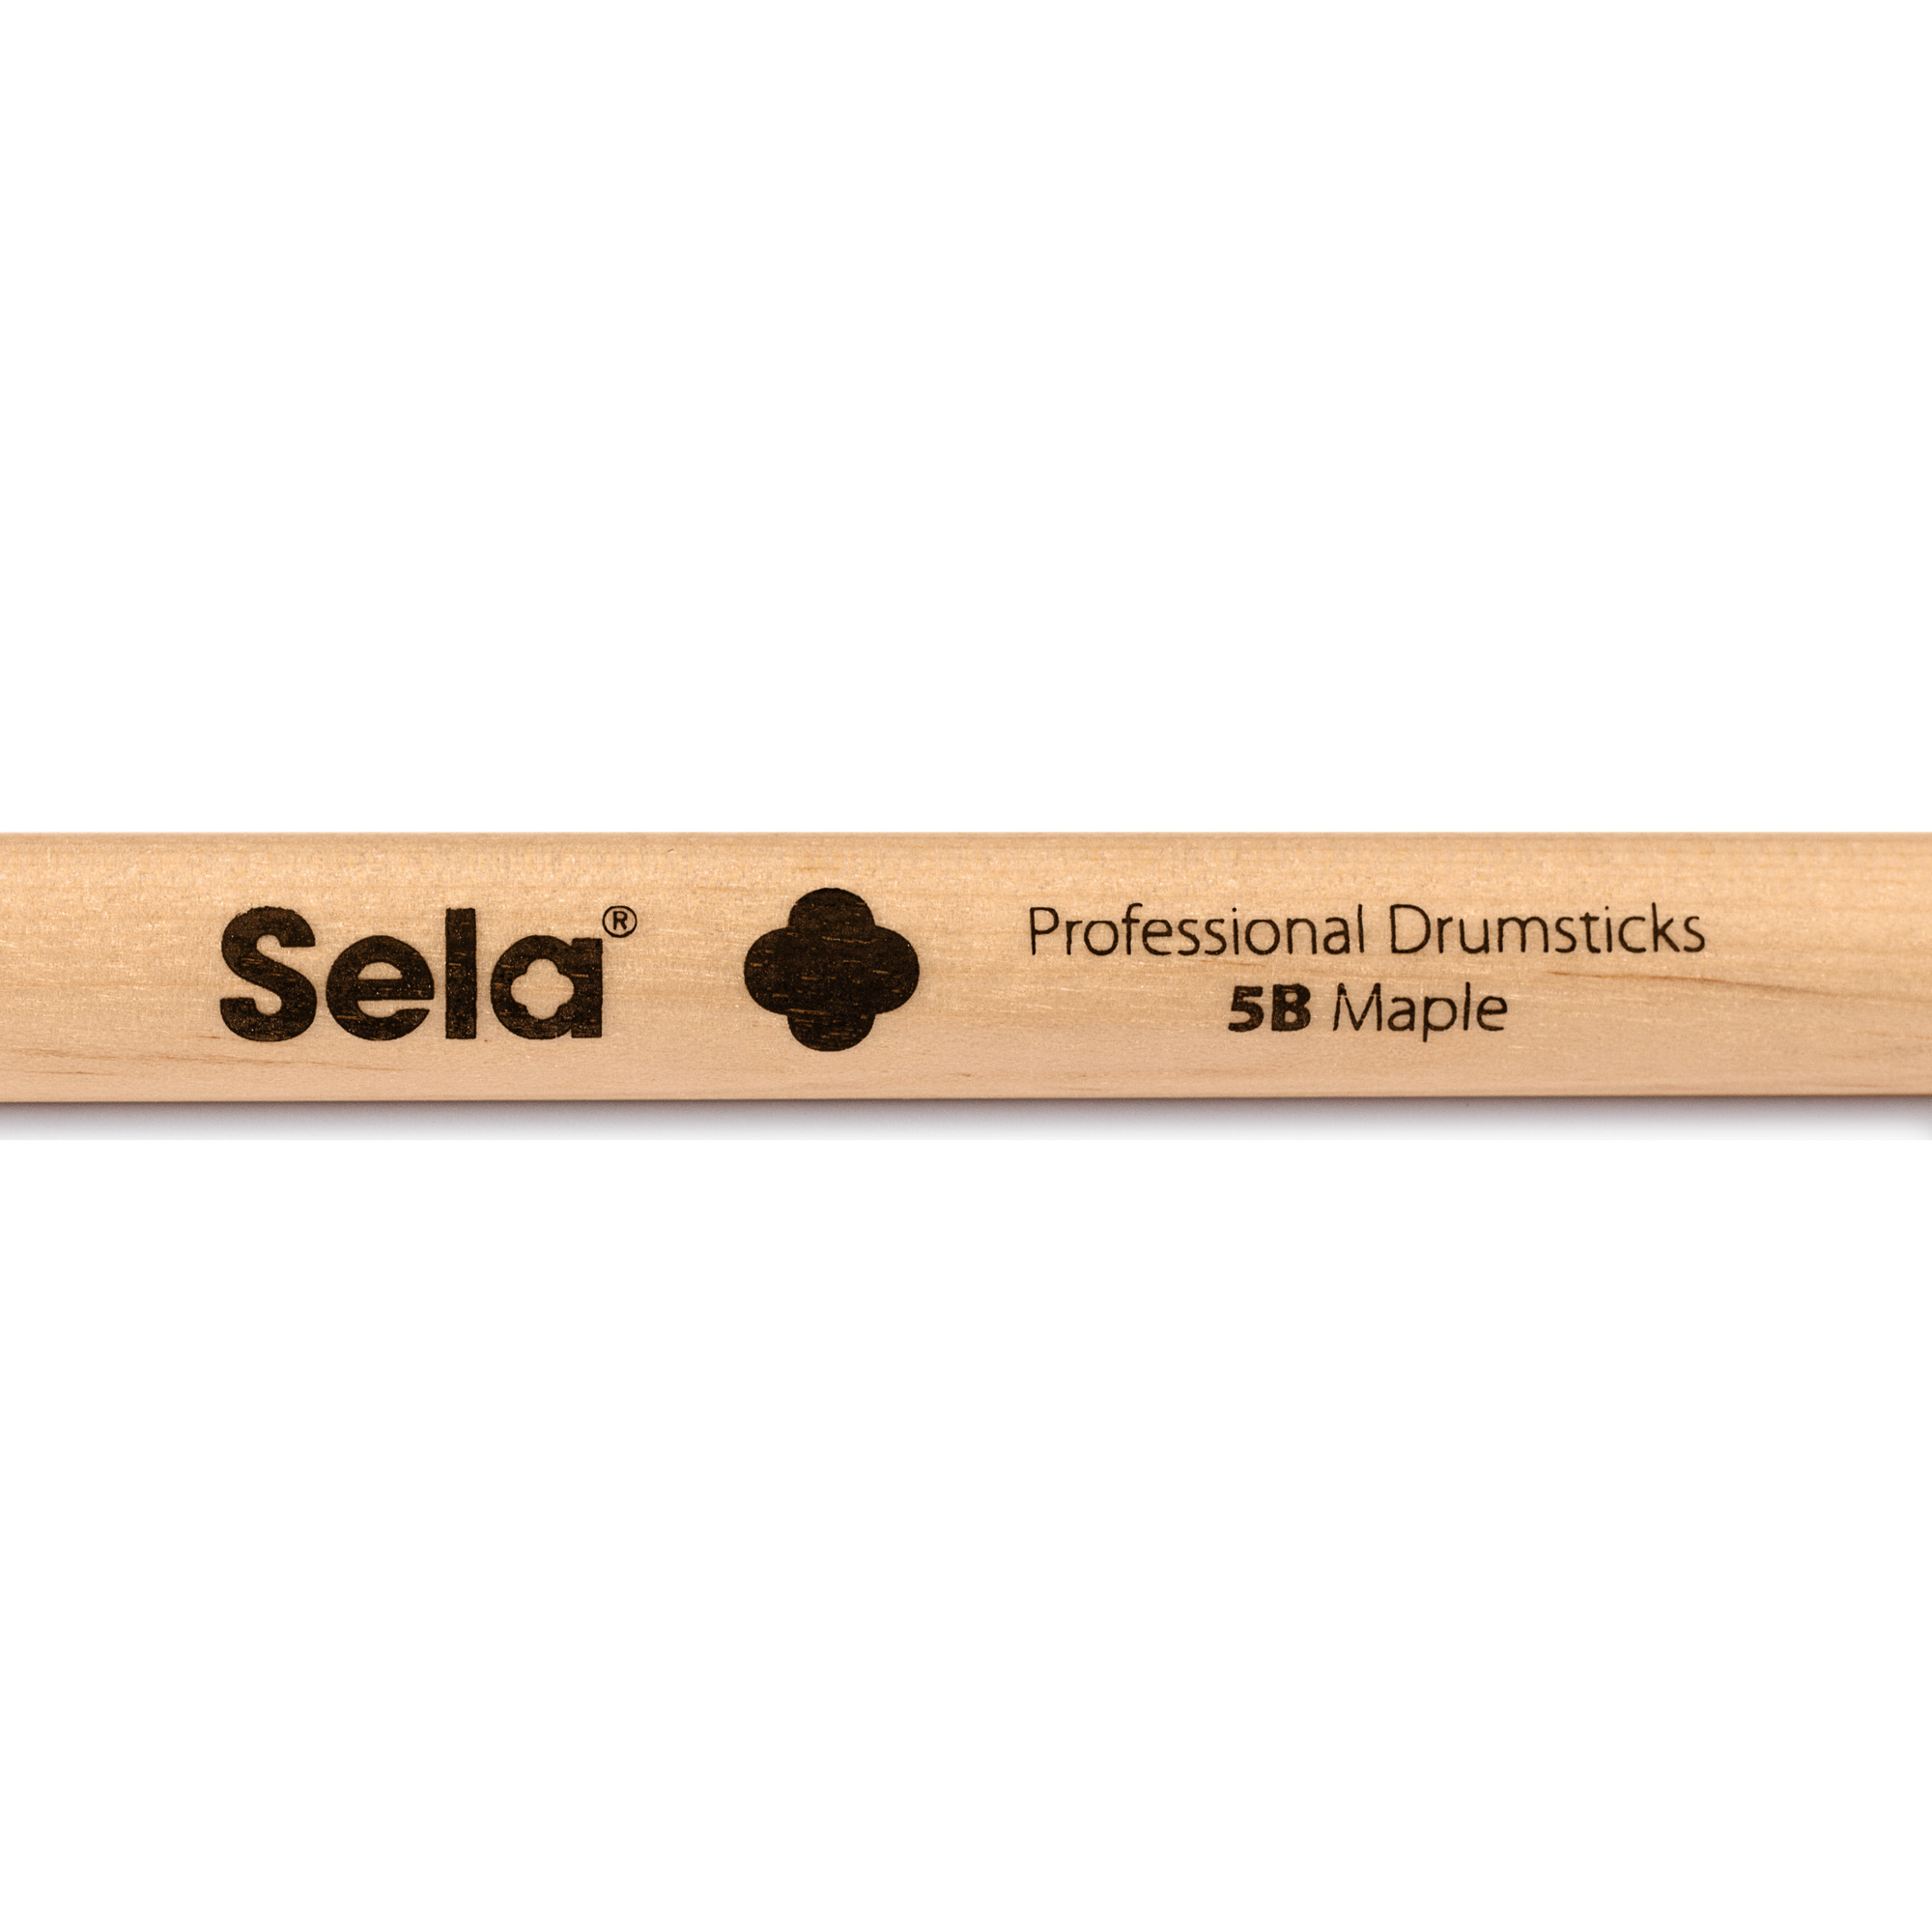 Professional Drumsticks 5B Maple (6 pair) Product Photos 3